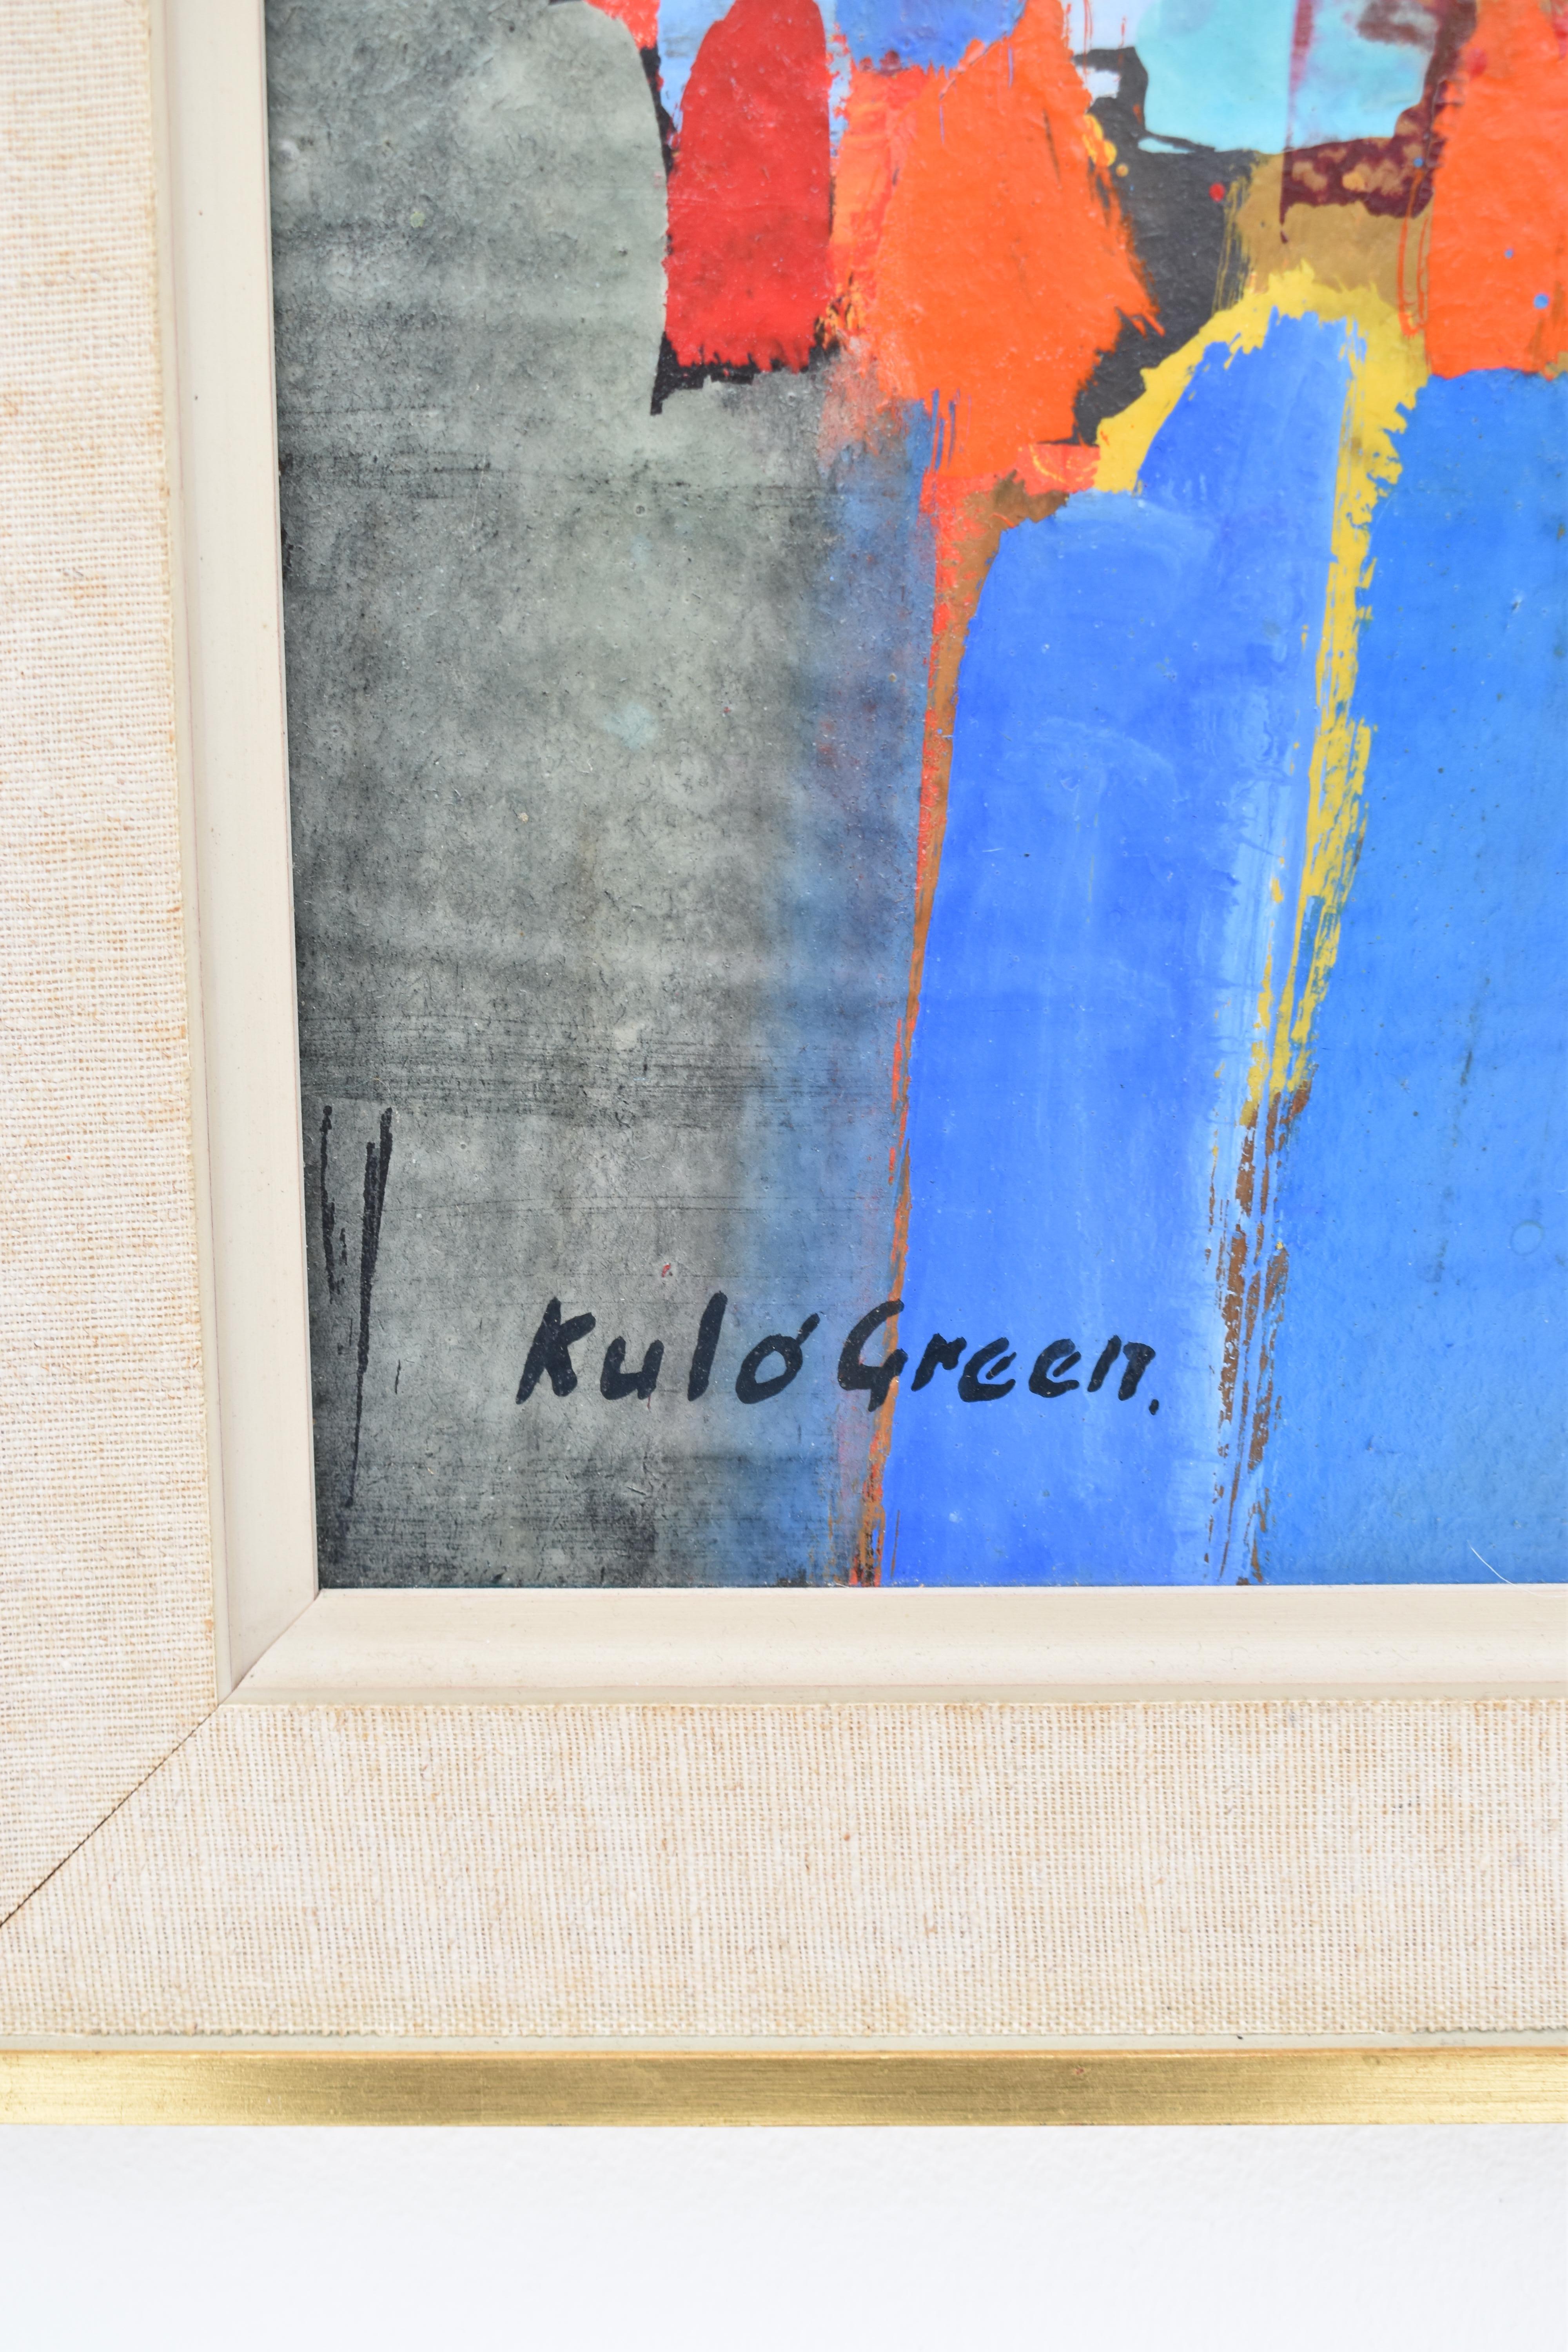 1960s Original Abstract Painting By Swedish Artist Kulo Green (1913-1972) For Sale 3